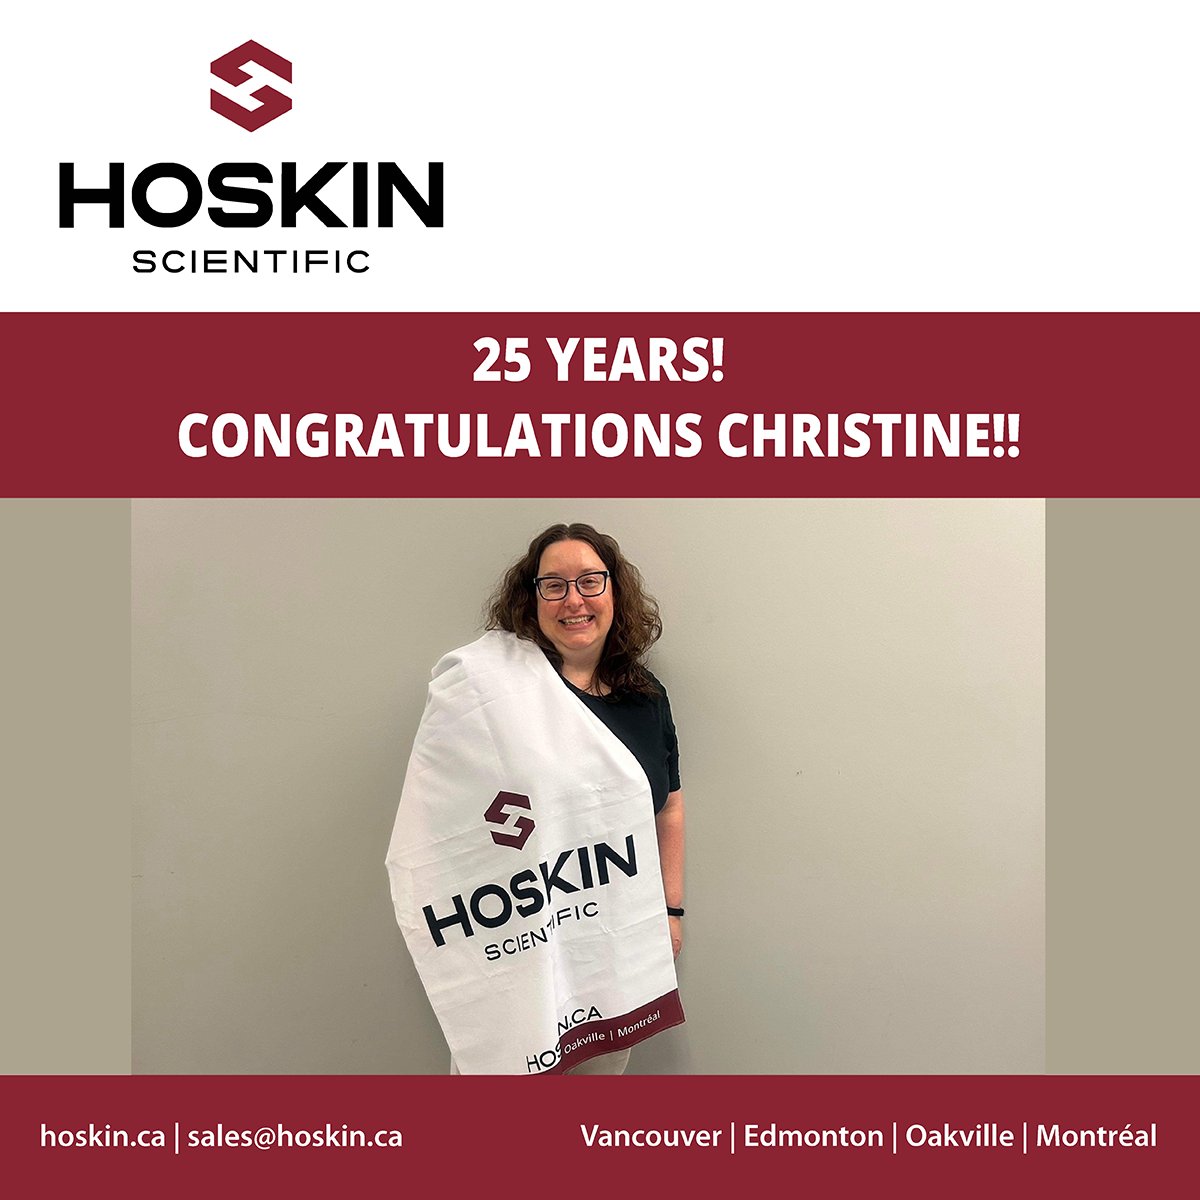 All of us at Hoskin would like to congratulate Christine Rutherford for TWENTY-FIVE YEARS at Hoskin Scientific!  
Christine is our Warehouse Operations Manager, supervising all of our warehouses across the country!  Thank you Christine and congratulations from us all!